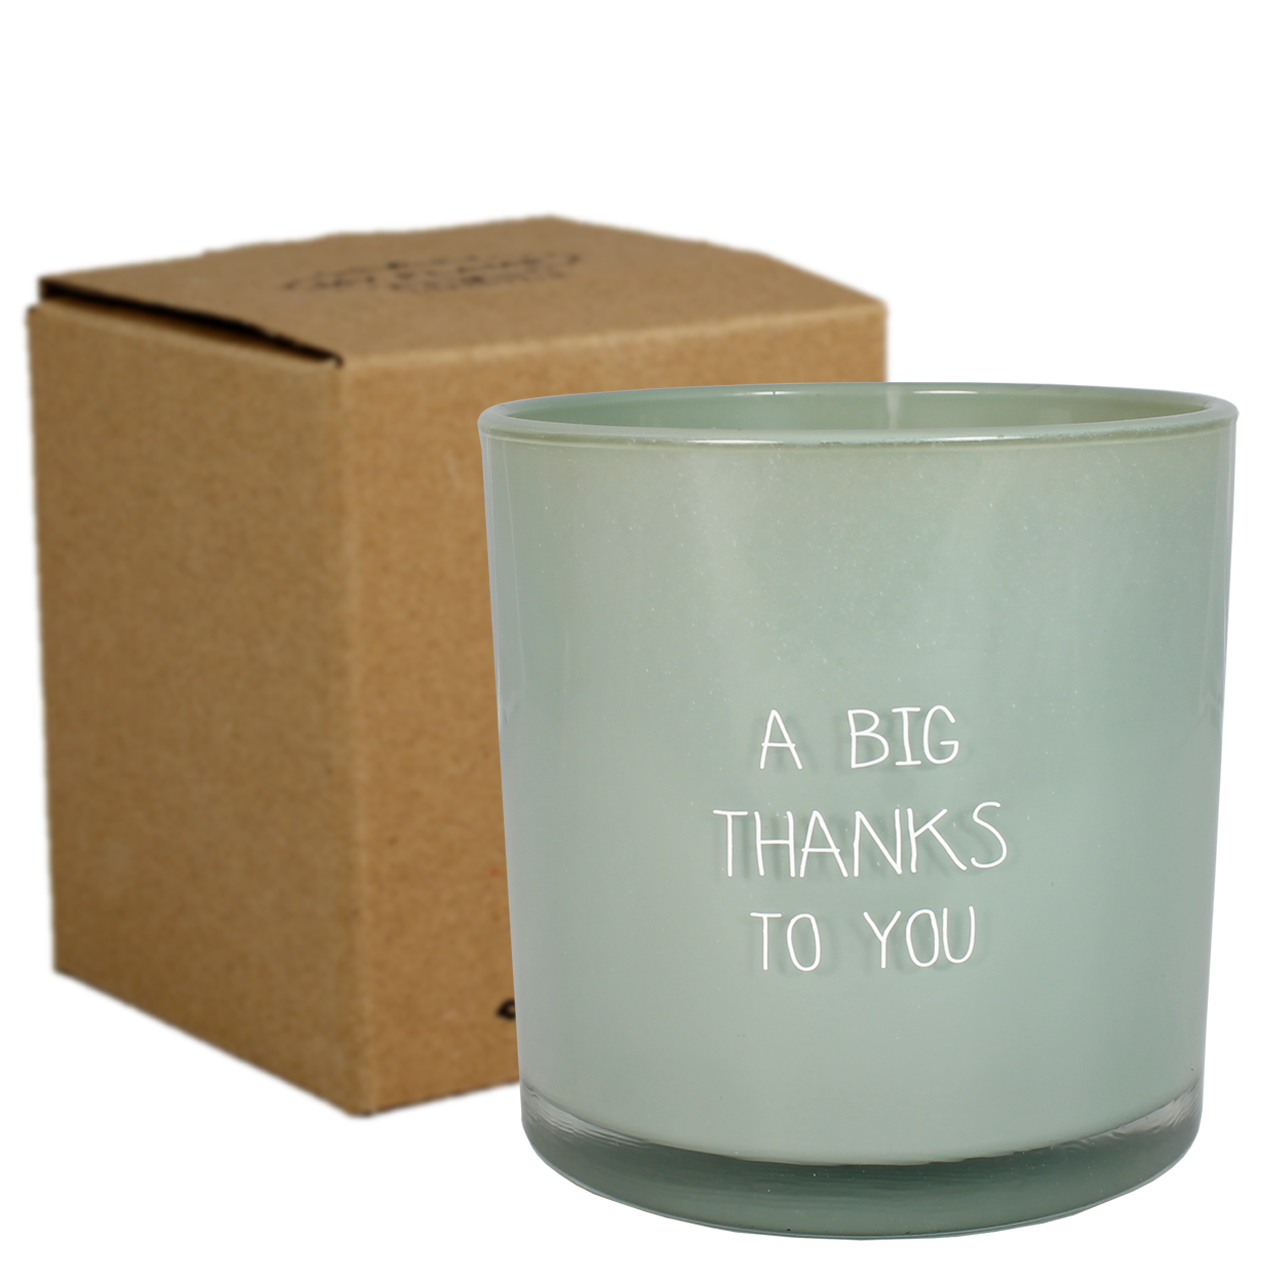 My Flame Lifestyle SOY CANDLE - A BIG THANKS TO YOU - SCENT: MINTY BAMBOO